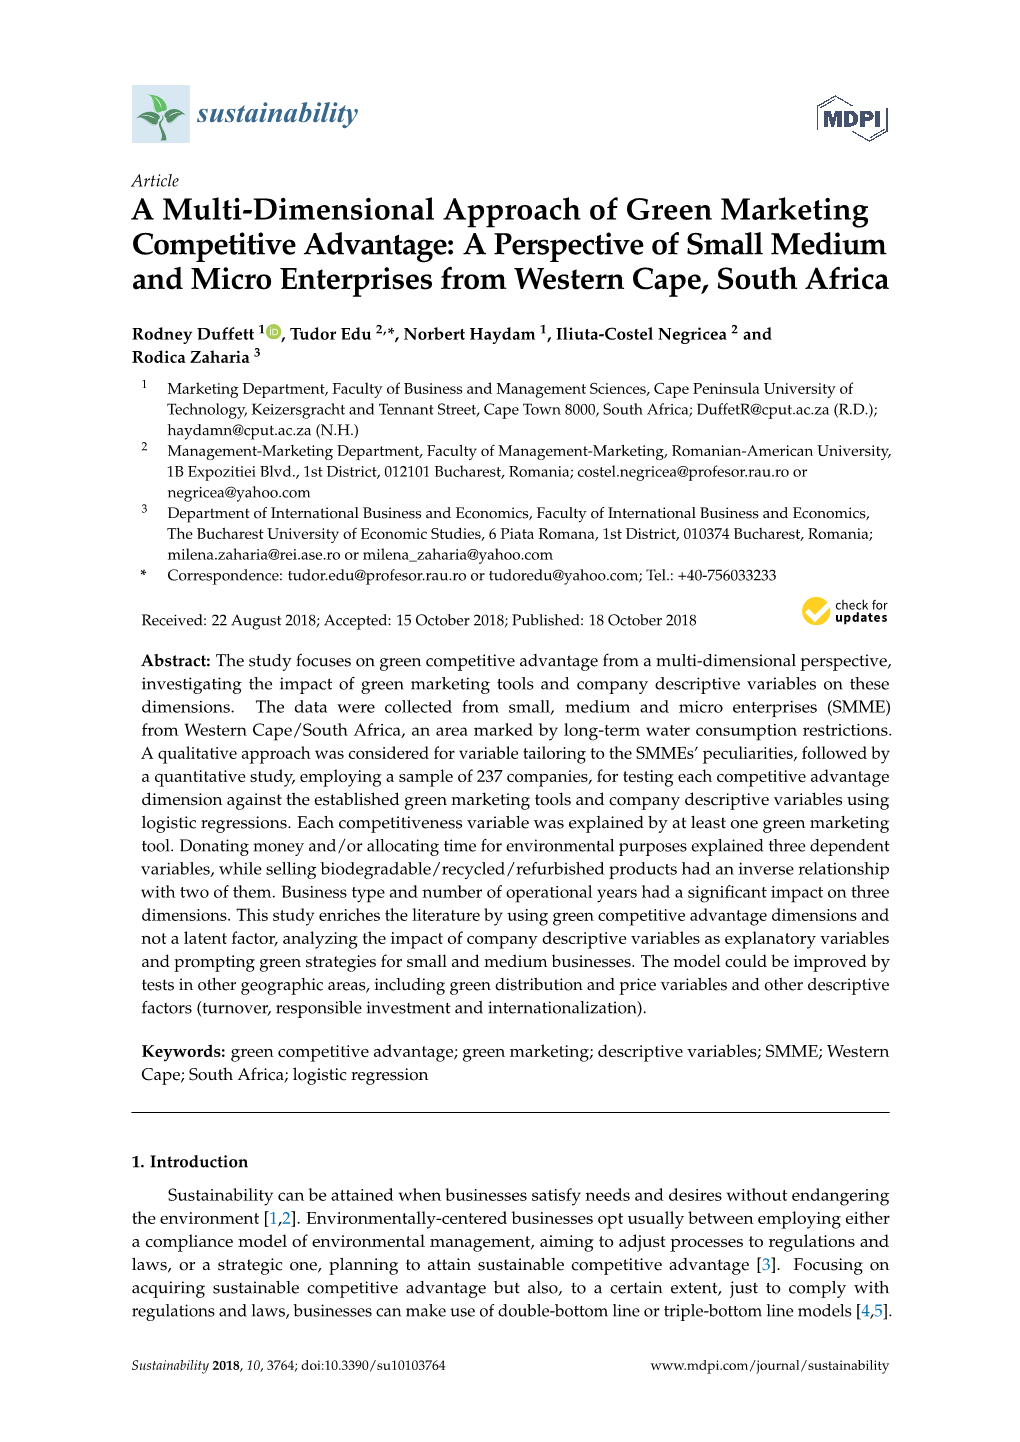 A Multi-Dimensional Approach of Green Marketing Competitive Advantage: a Perspective of Small Medium and Micro Enterprises from Western Cape, South Africa